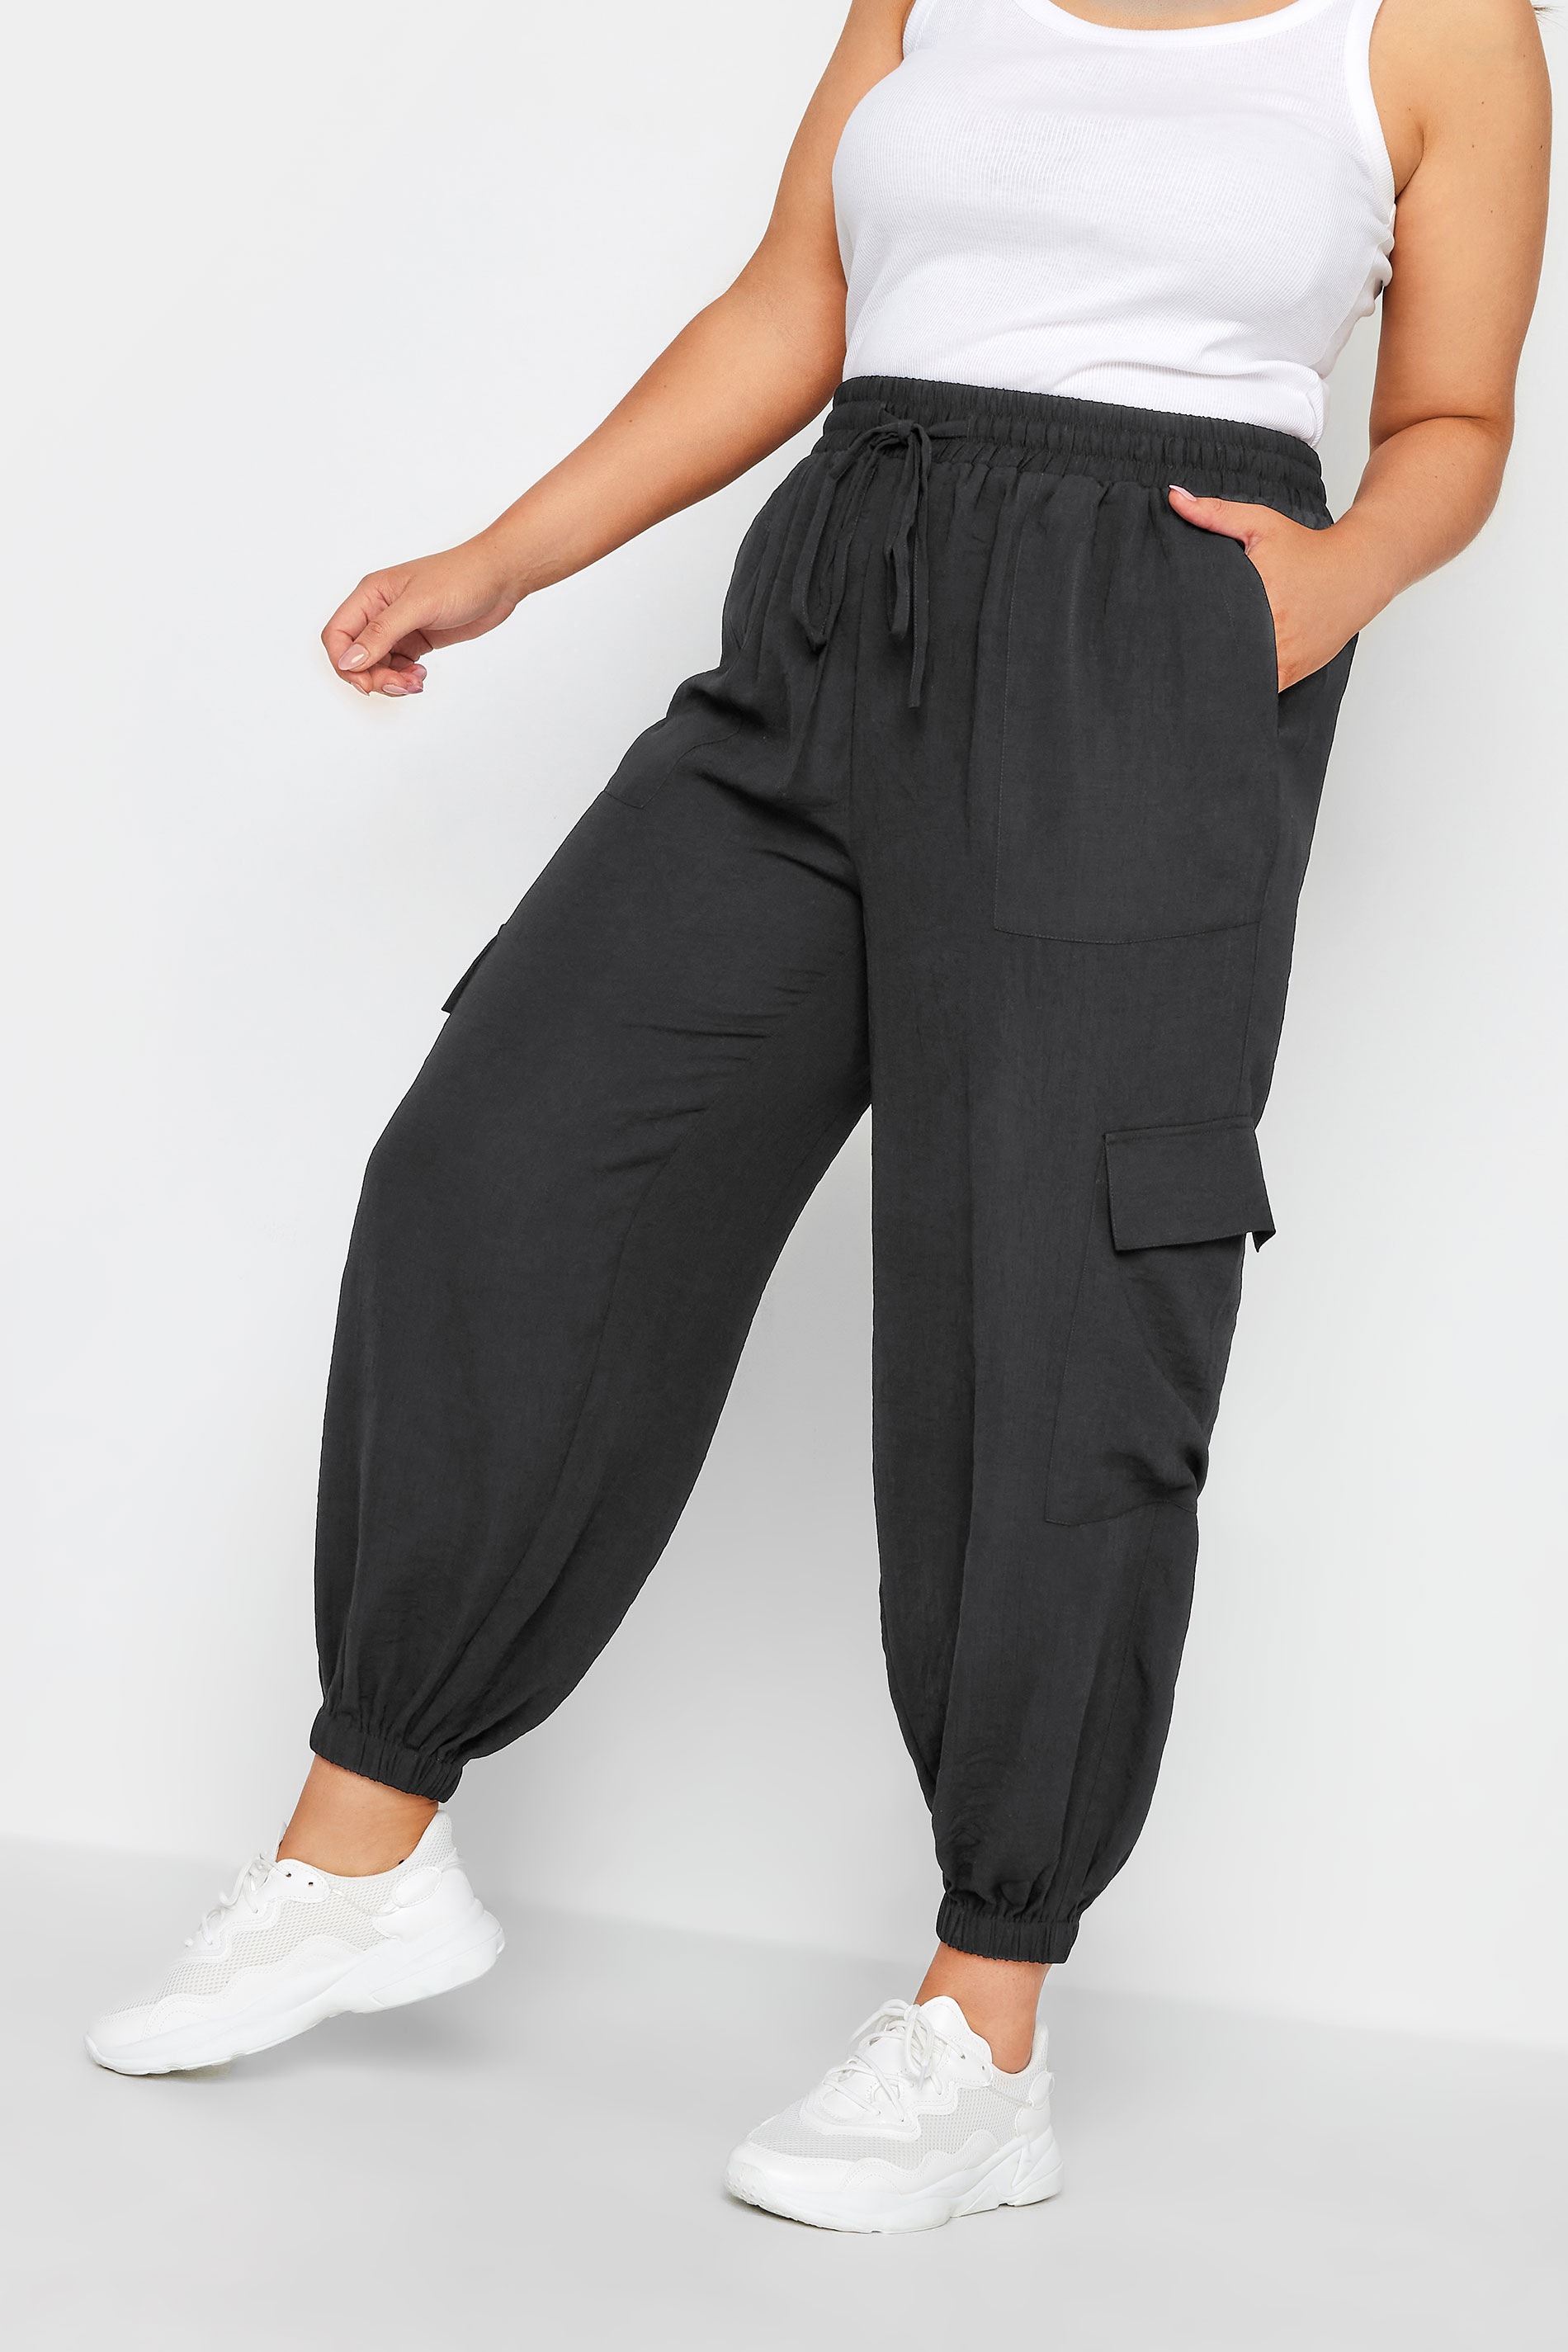 LIMITED COLLECTION Plus Size Black Cargo Pocket Trousers 1